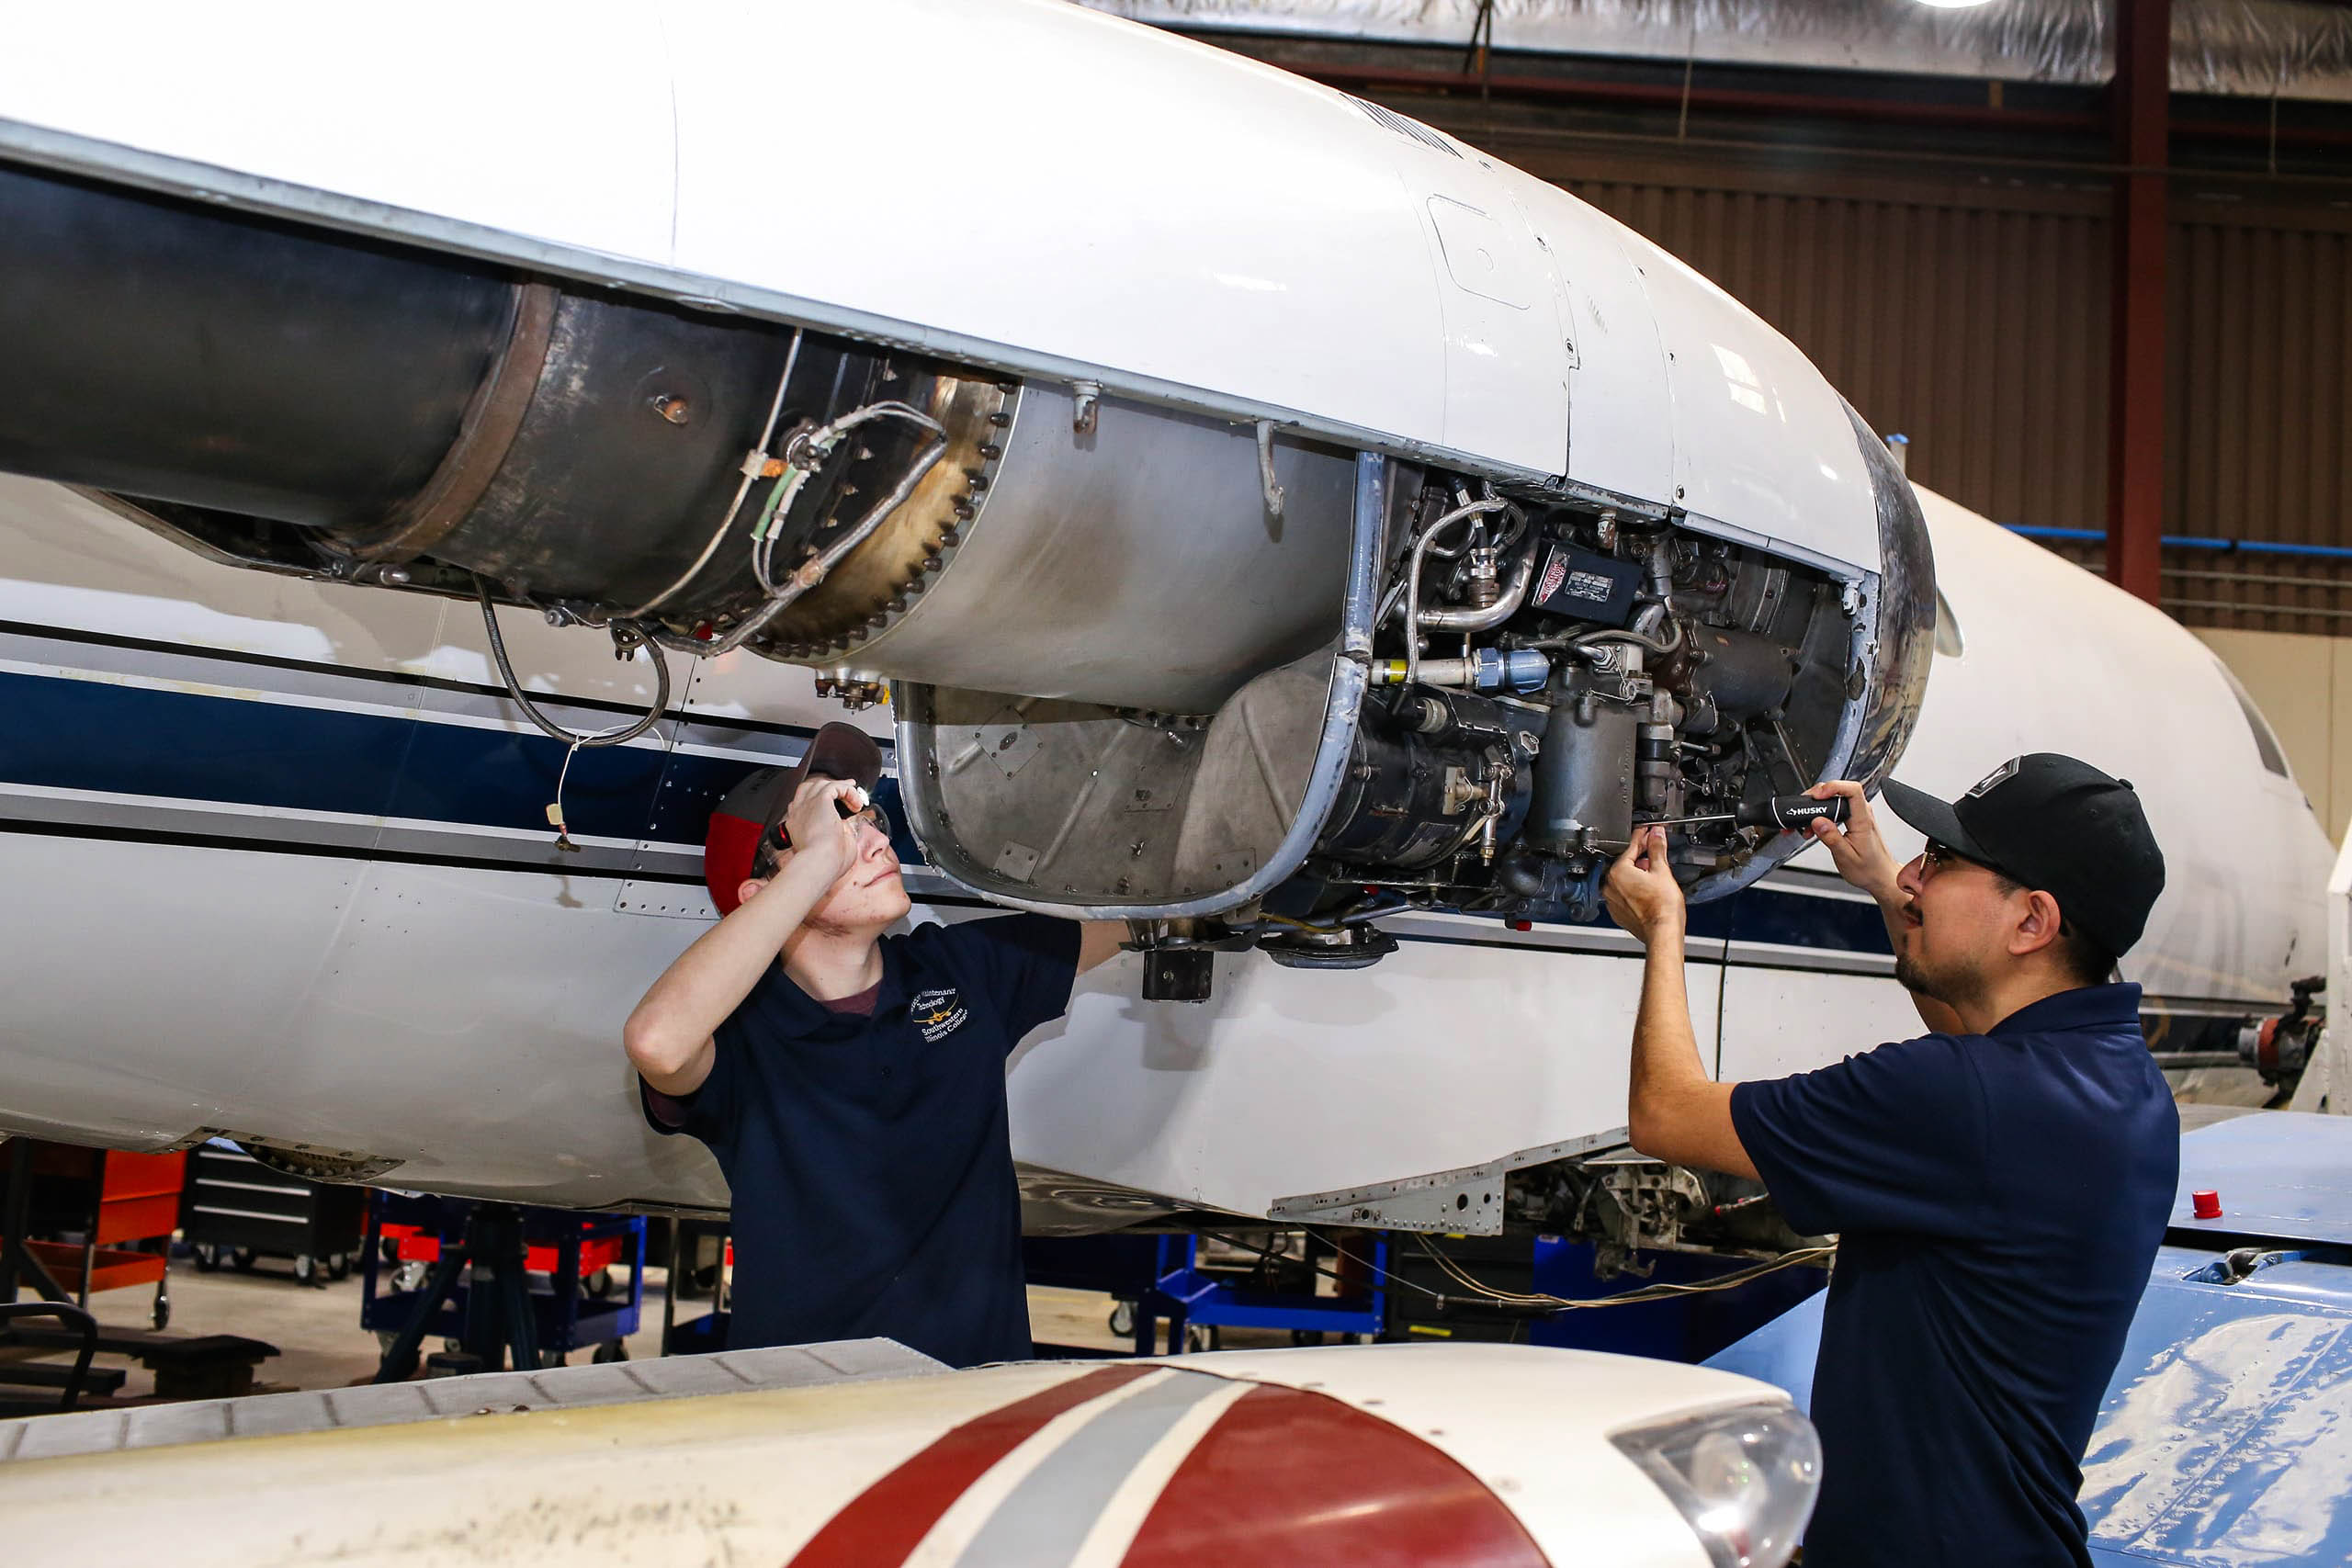 Two students in the aviation program doing overhead maintenance on a large plane engine